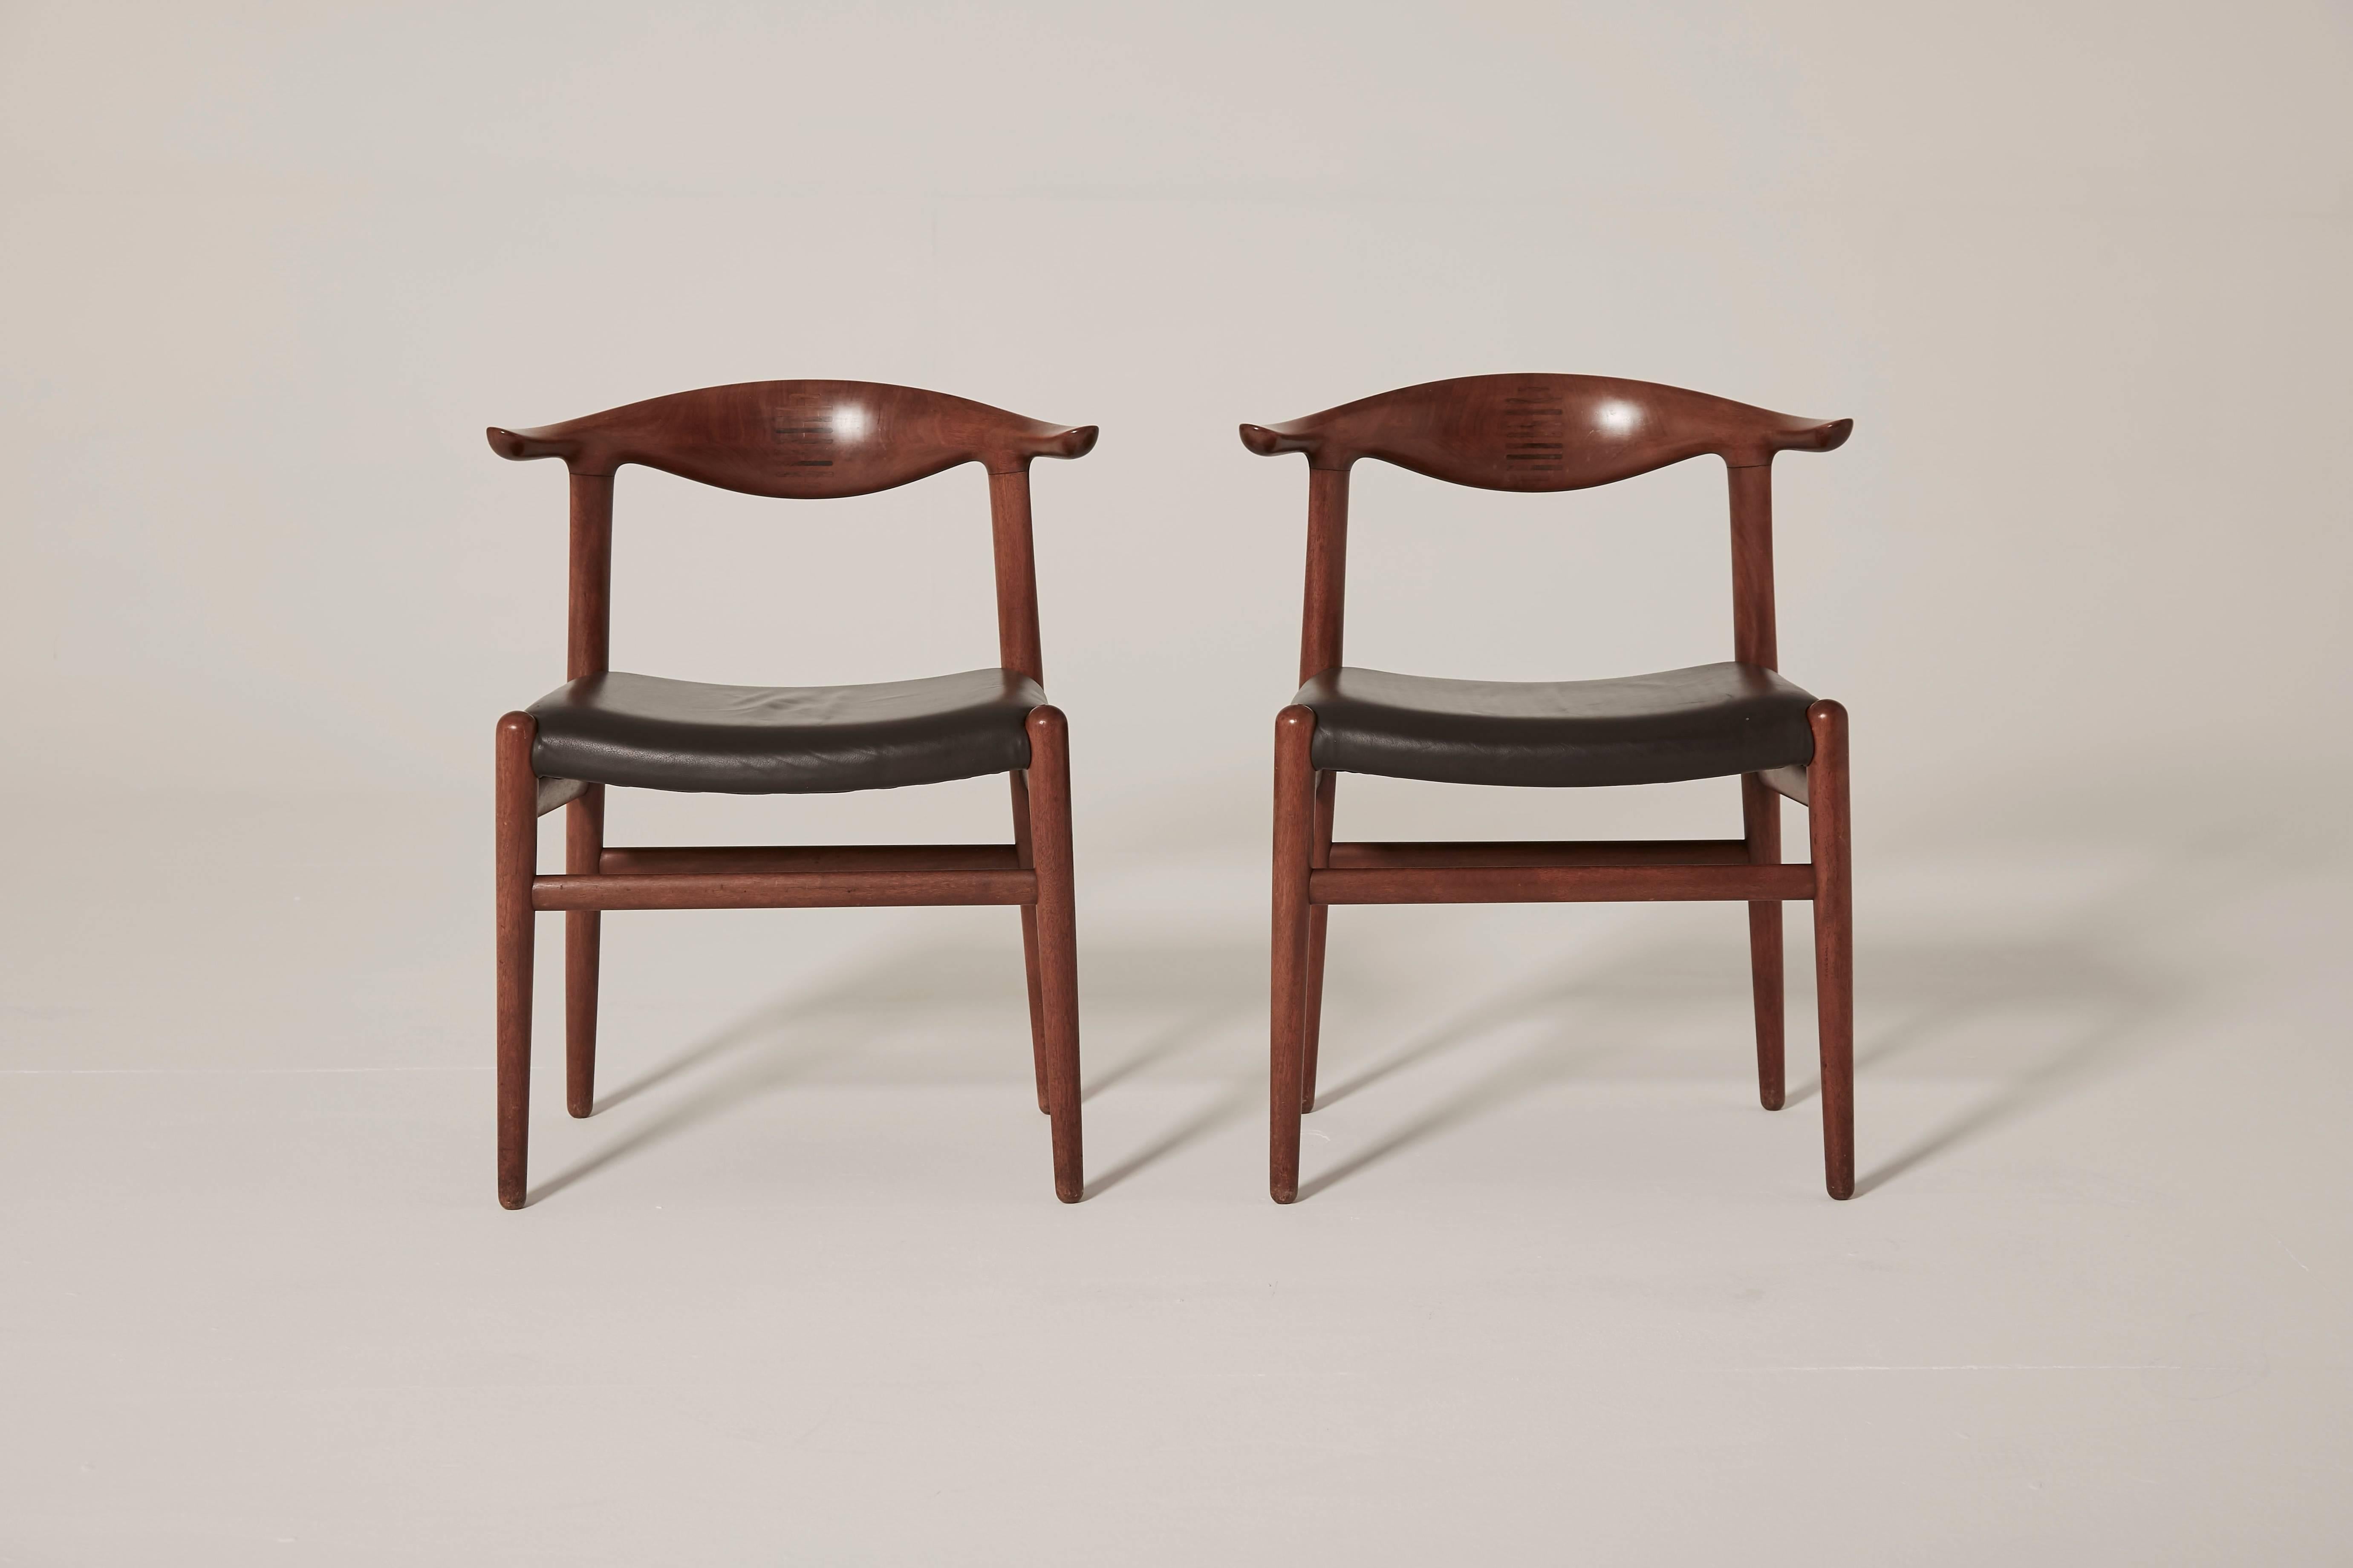 Hans Wegner cow horn (Kohornstol) Chairs model JH 505, made by Johannes Hansen, Denmark. Teak and rosewood inlay. Dark brown skai seats. Ships worldwide - please contact us for options. If you are looking for a cane seated version of this chair